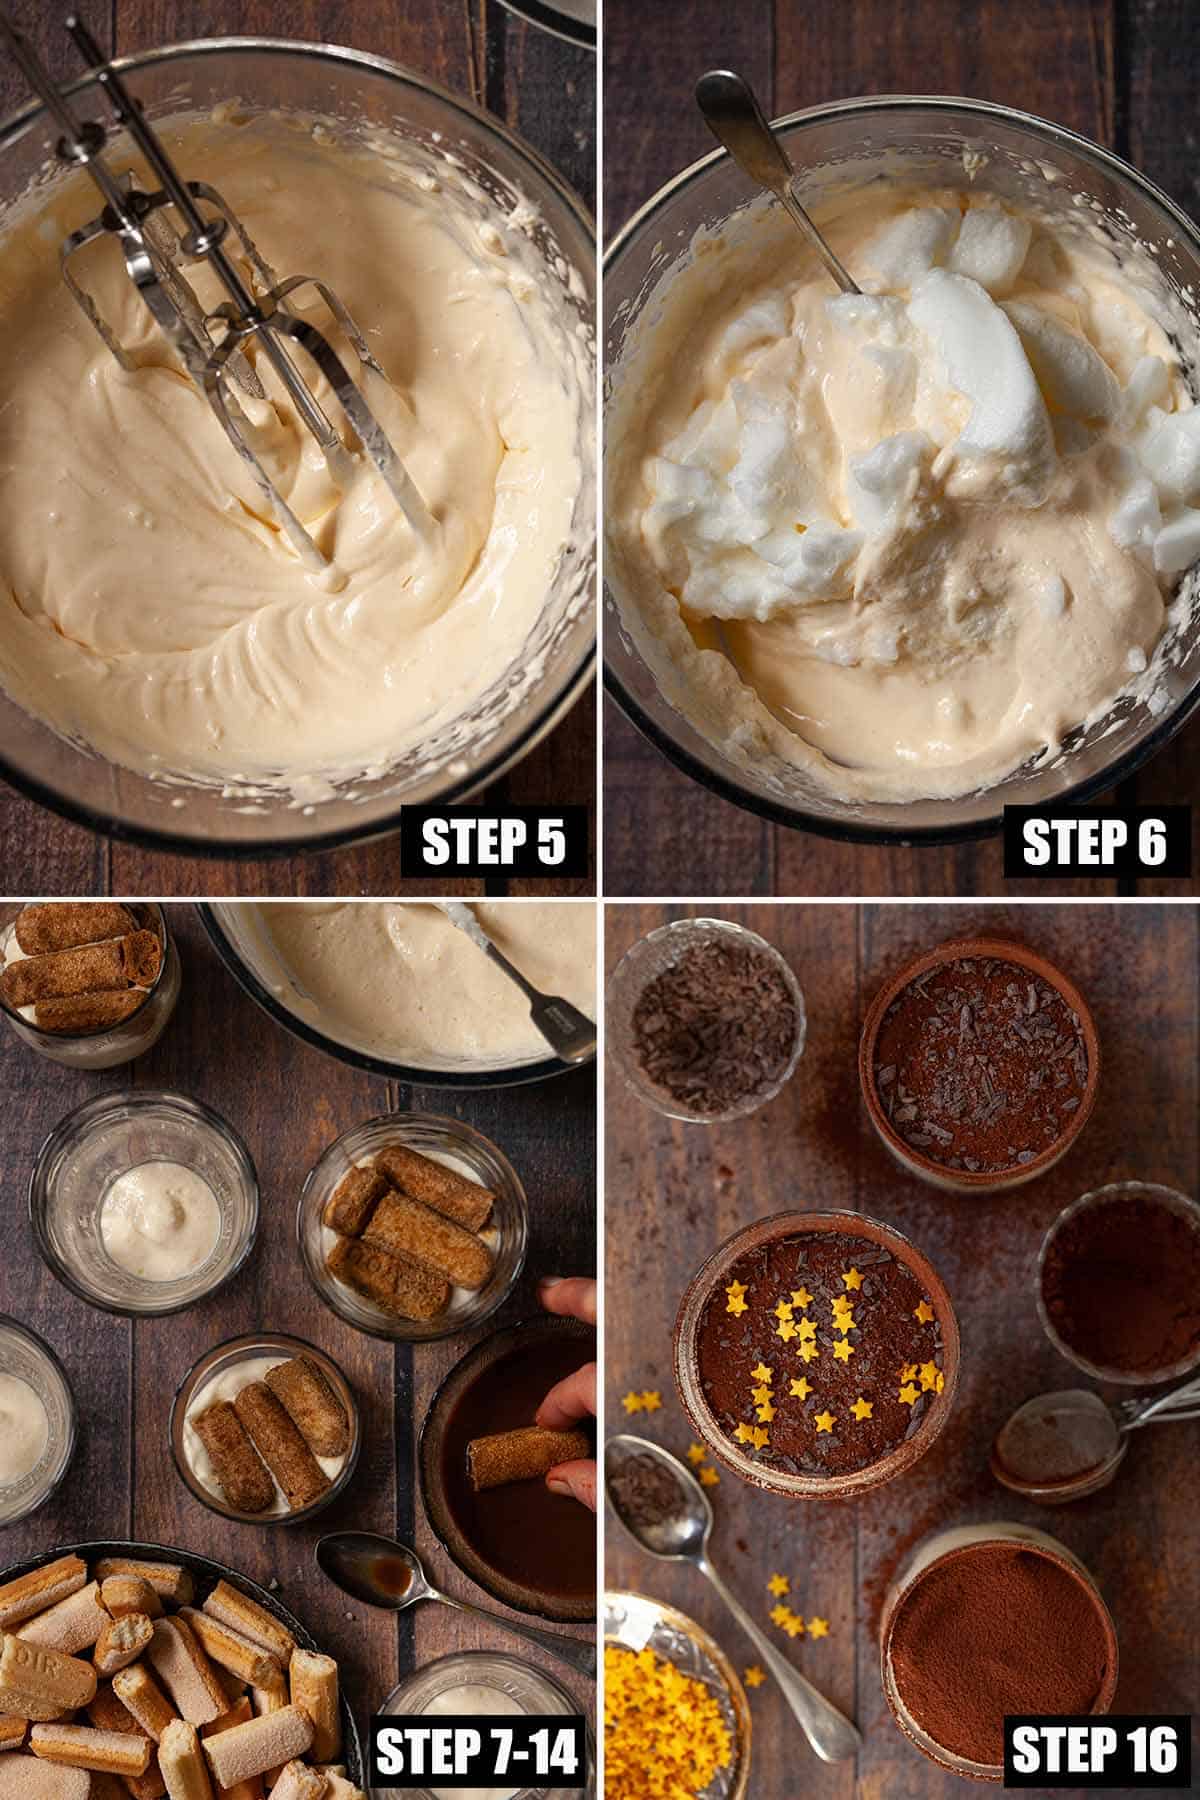 Collage of images showing a creamy Italian dessert being made.